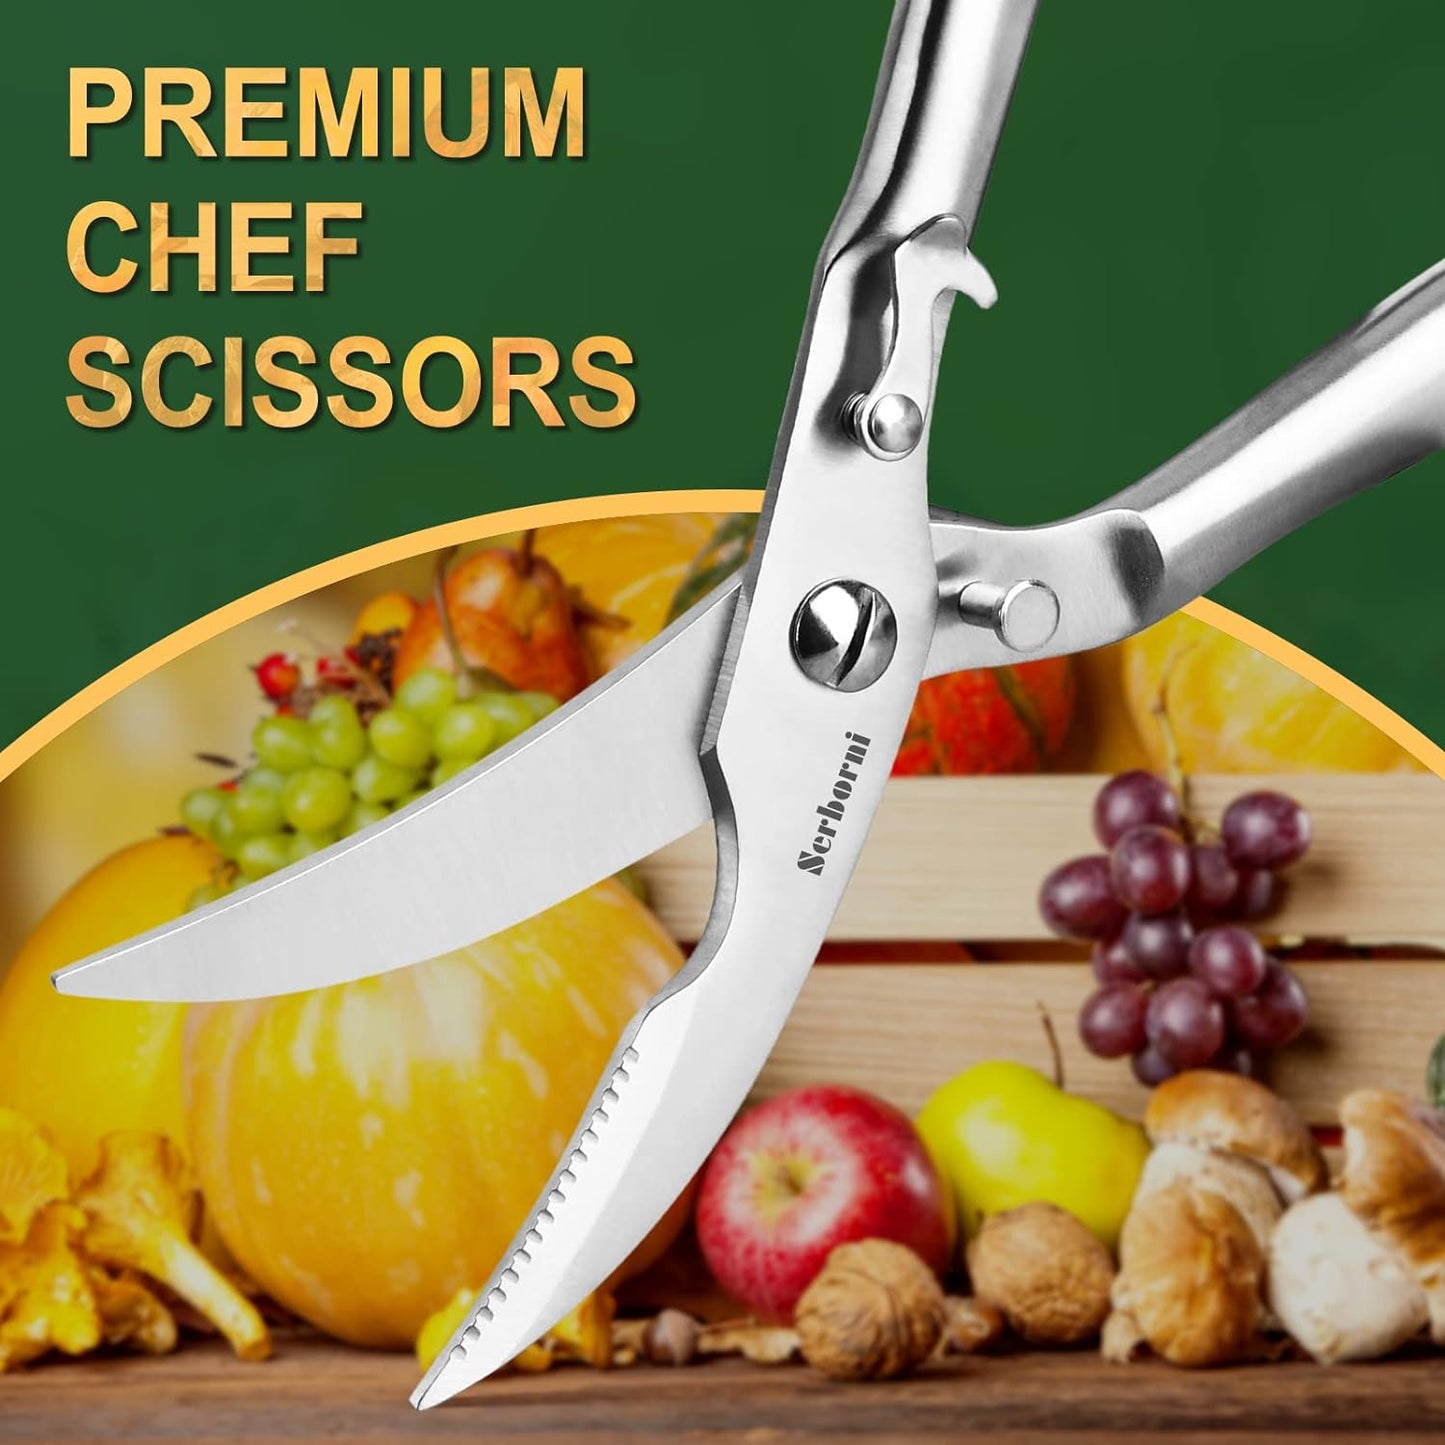 Serborni Kitchen Shears Heavy Duty Poultry Metal Premium Kitchen Scissors With Safety Lock For Chicken, Bones, Turkey, Meat, Fish, Seafood, Vegetables, Herbs (Pro)